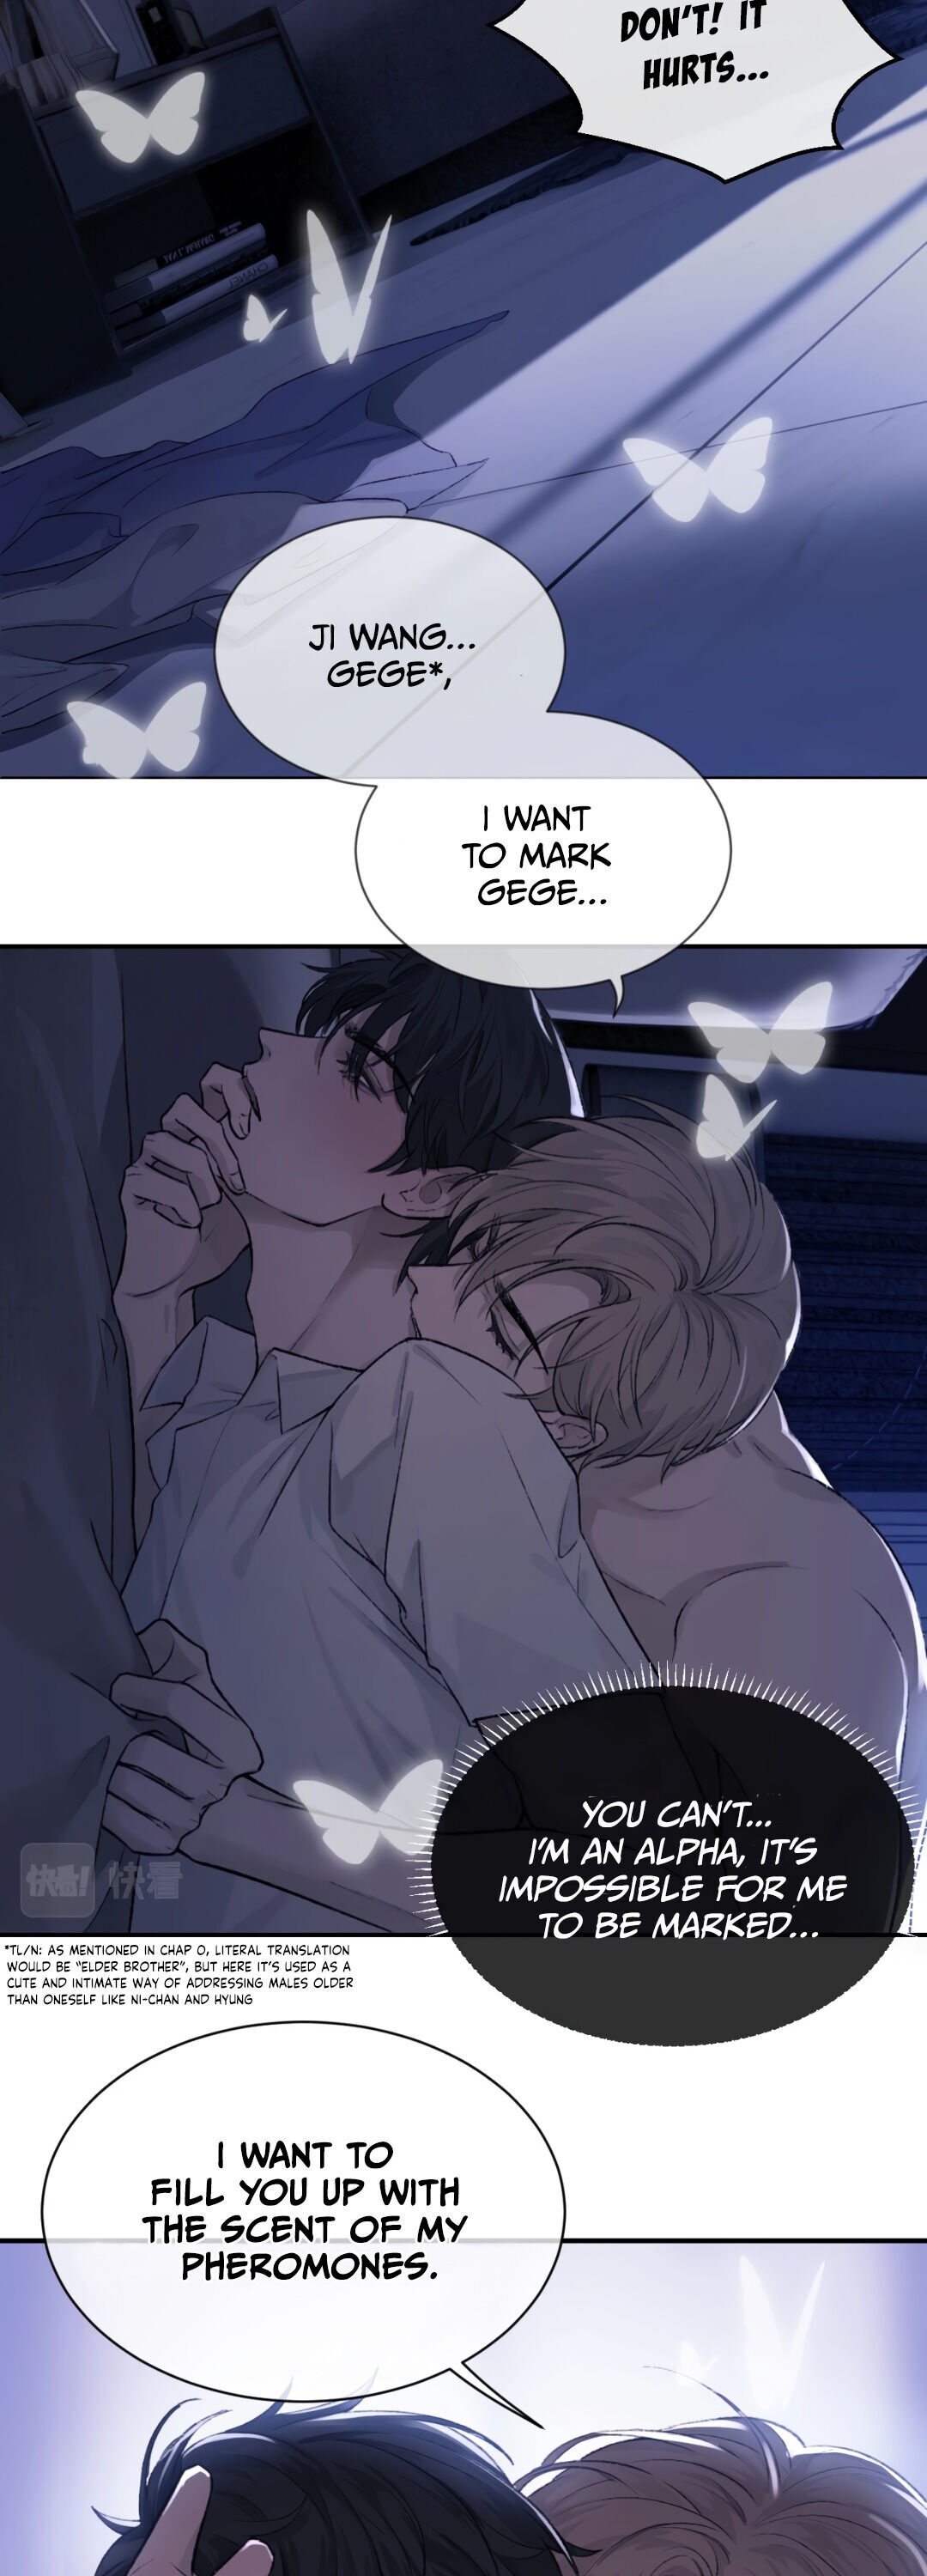 My One-Night Stand, I Can't Forget You - Page 2